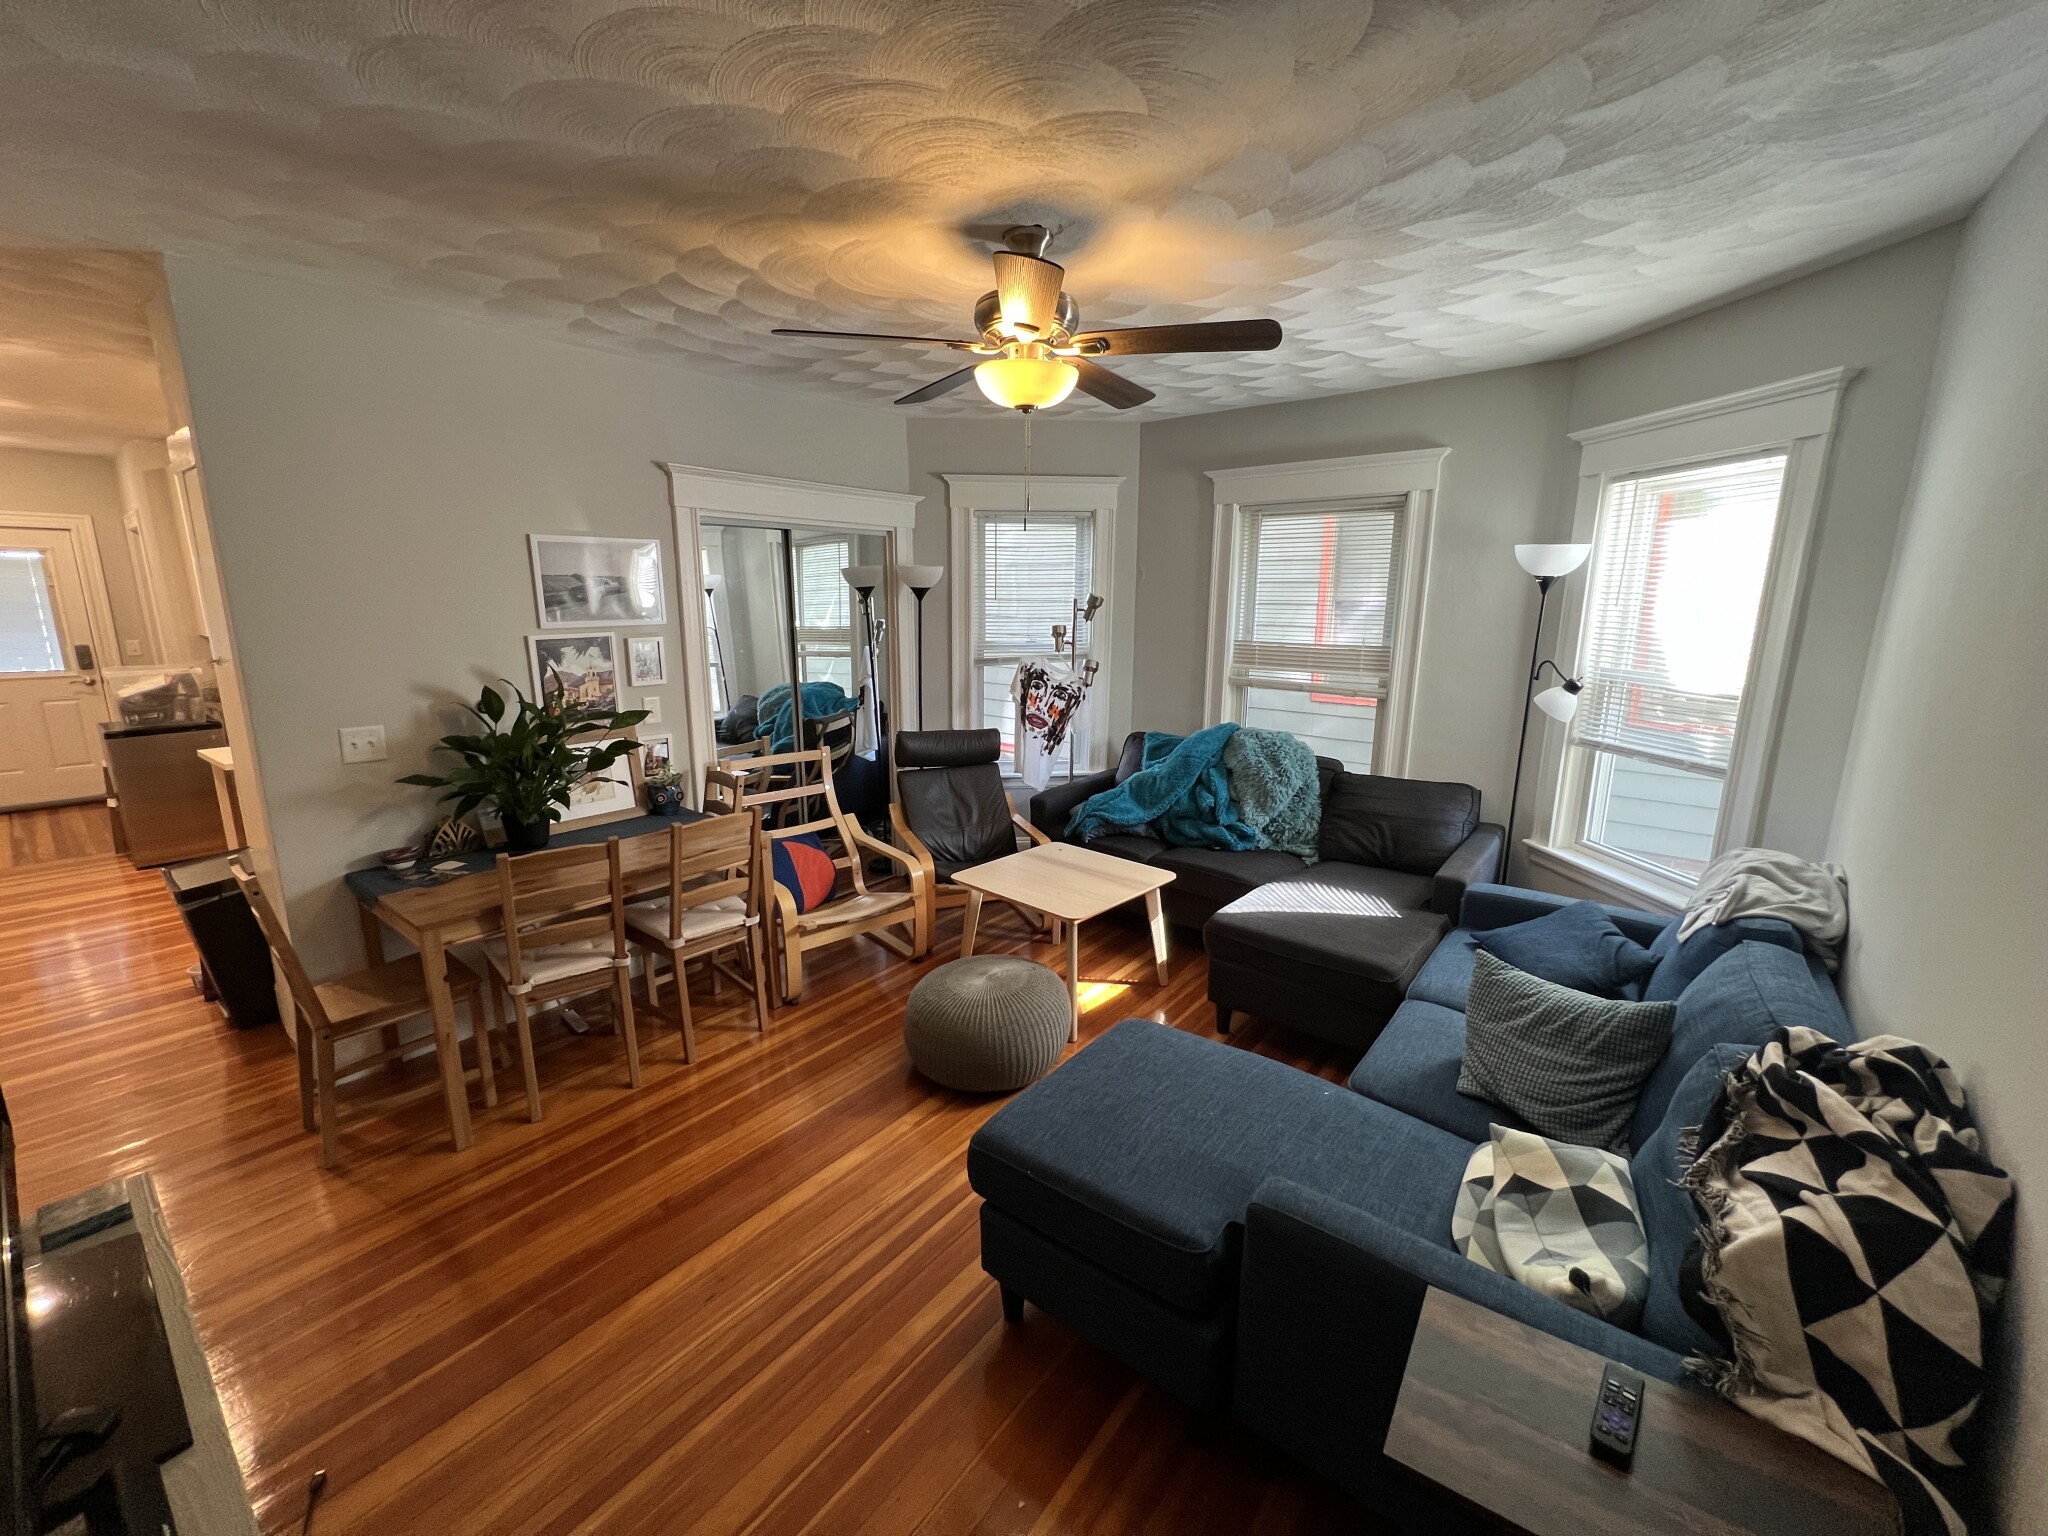 Photos of apartment on Lowden Ave.,Somerville MA 02144